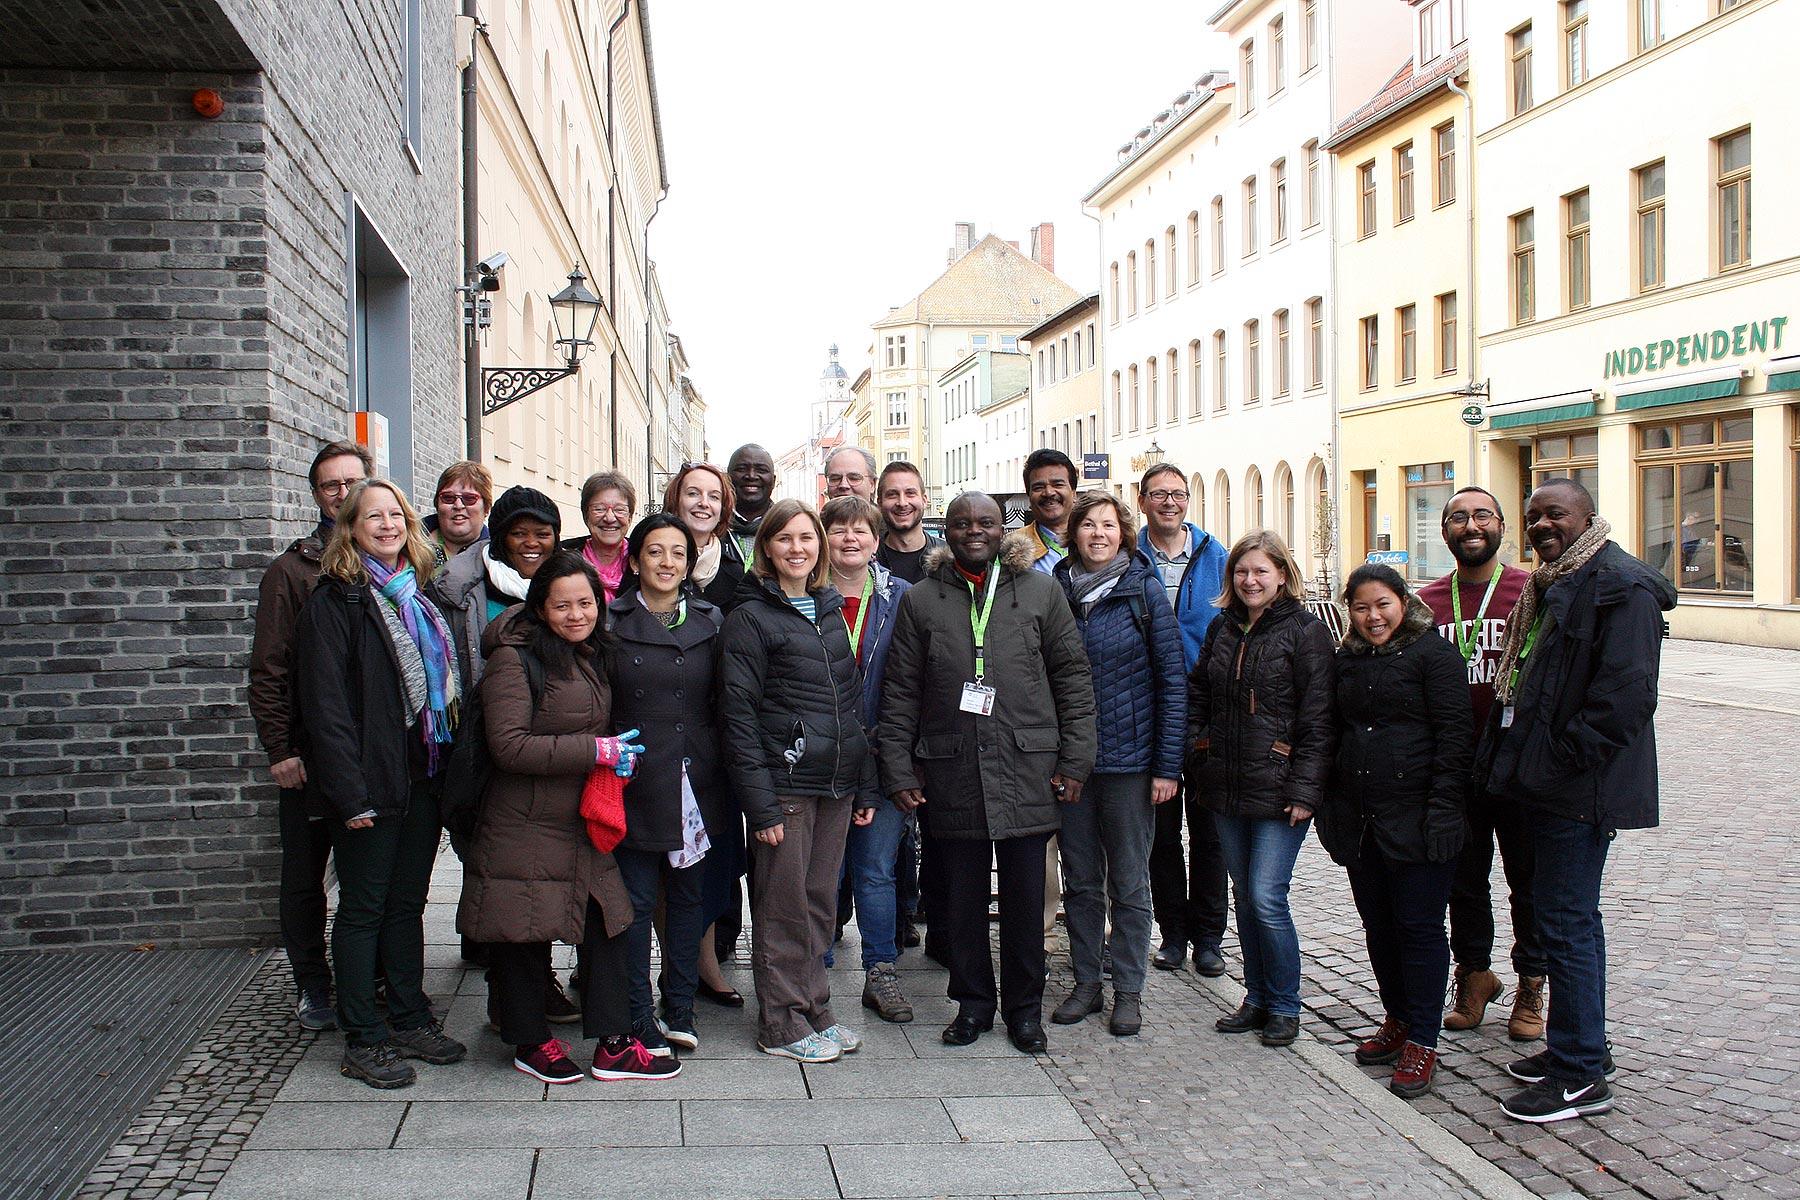 Participants of the 19th International Seminar for pastors during an excursion in Wittenberg, Germany. Photo: LWF/A. WeyermÃ¼ller